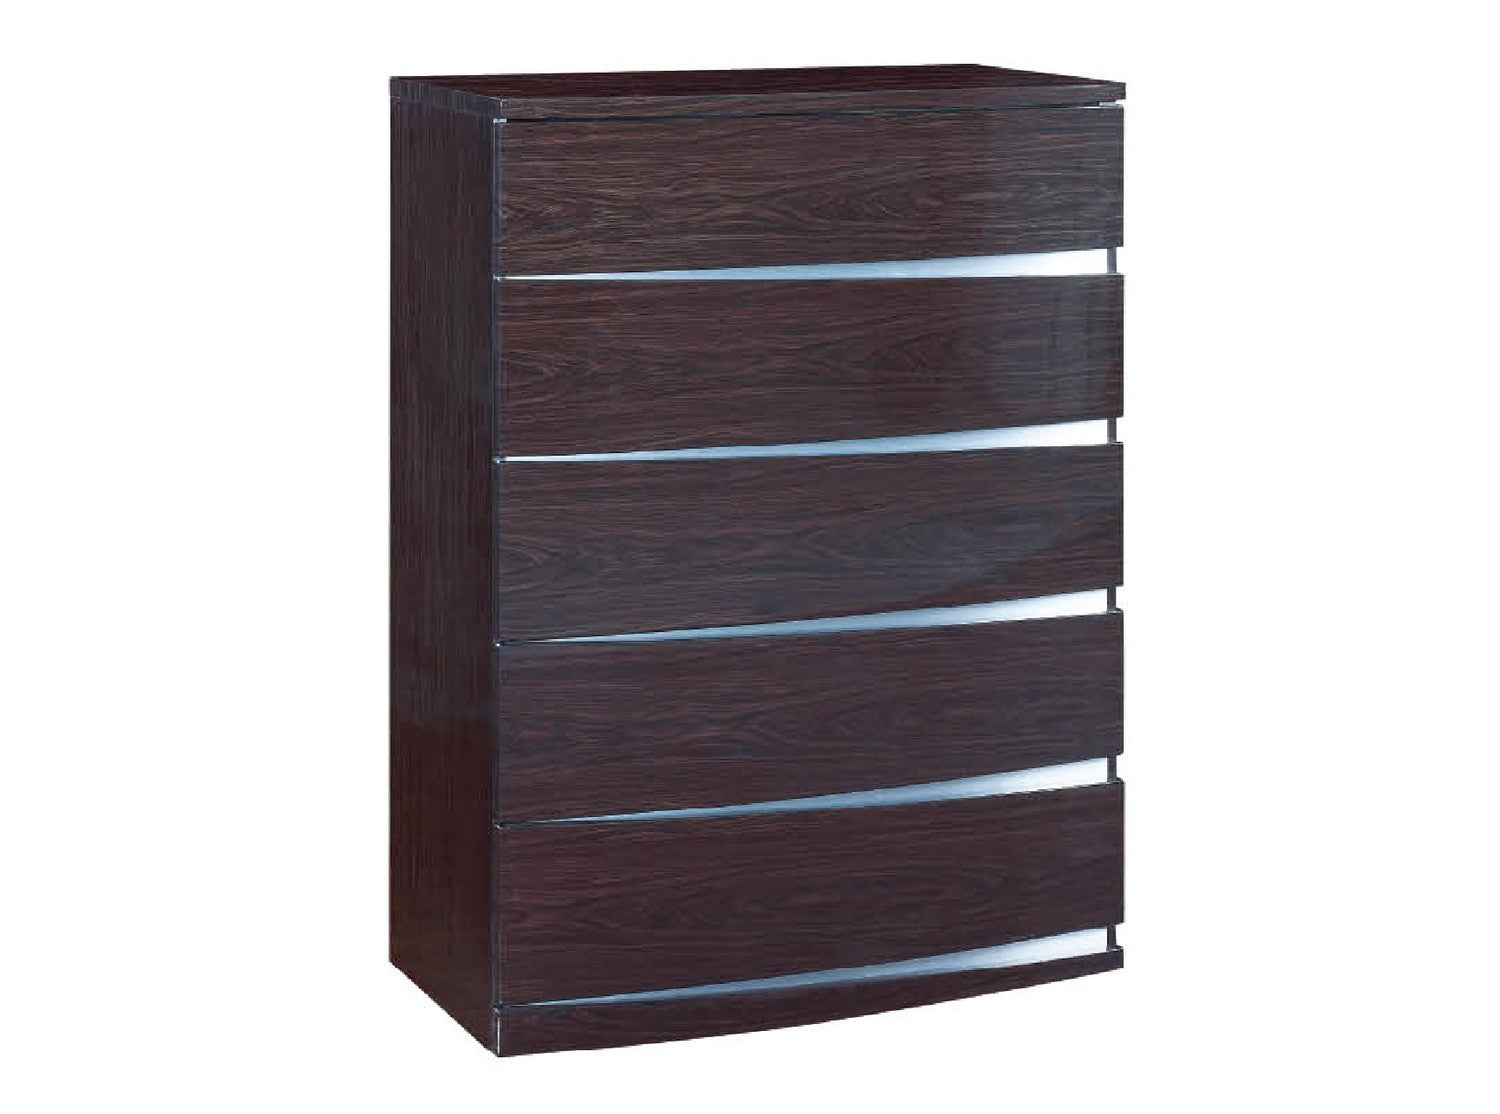 32" Exquisite Wenge High Gloss Chest Default Title